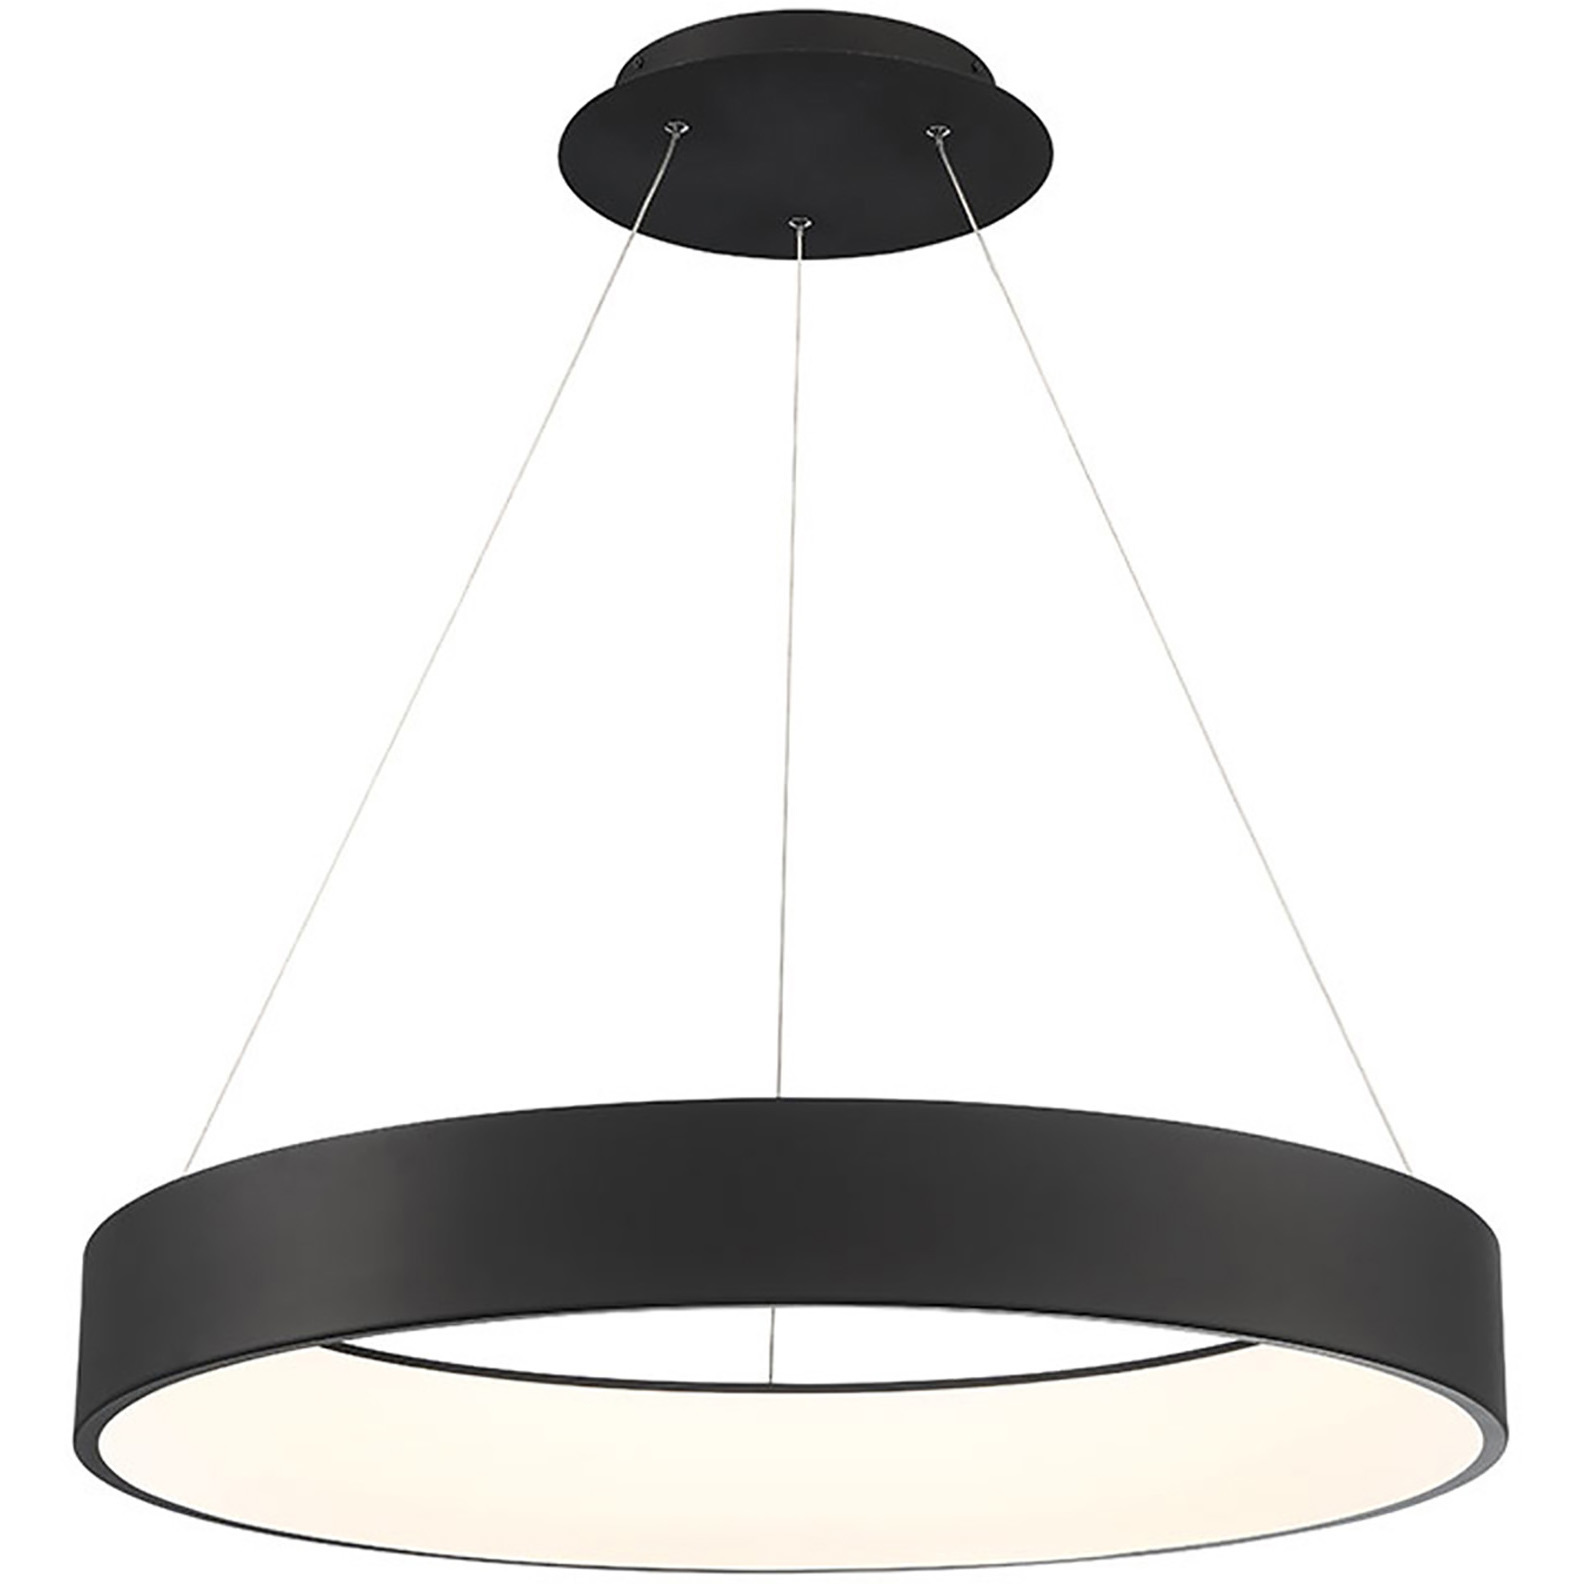 WAC Lighting PD-33732-BK Corso LED 32 inch Black Pendant Ceiling Light in  32in, dweLED